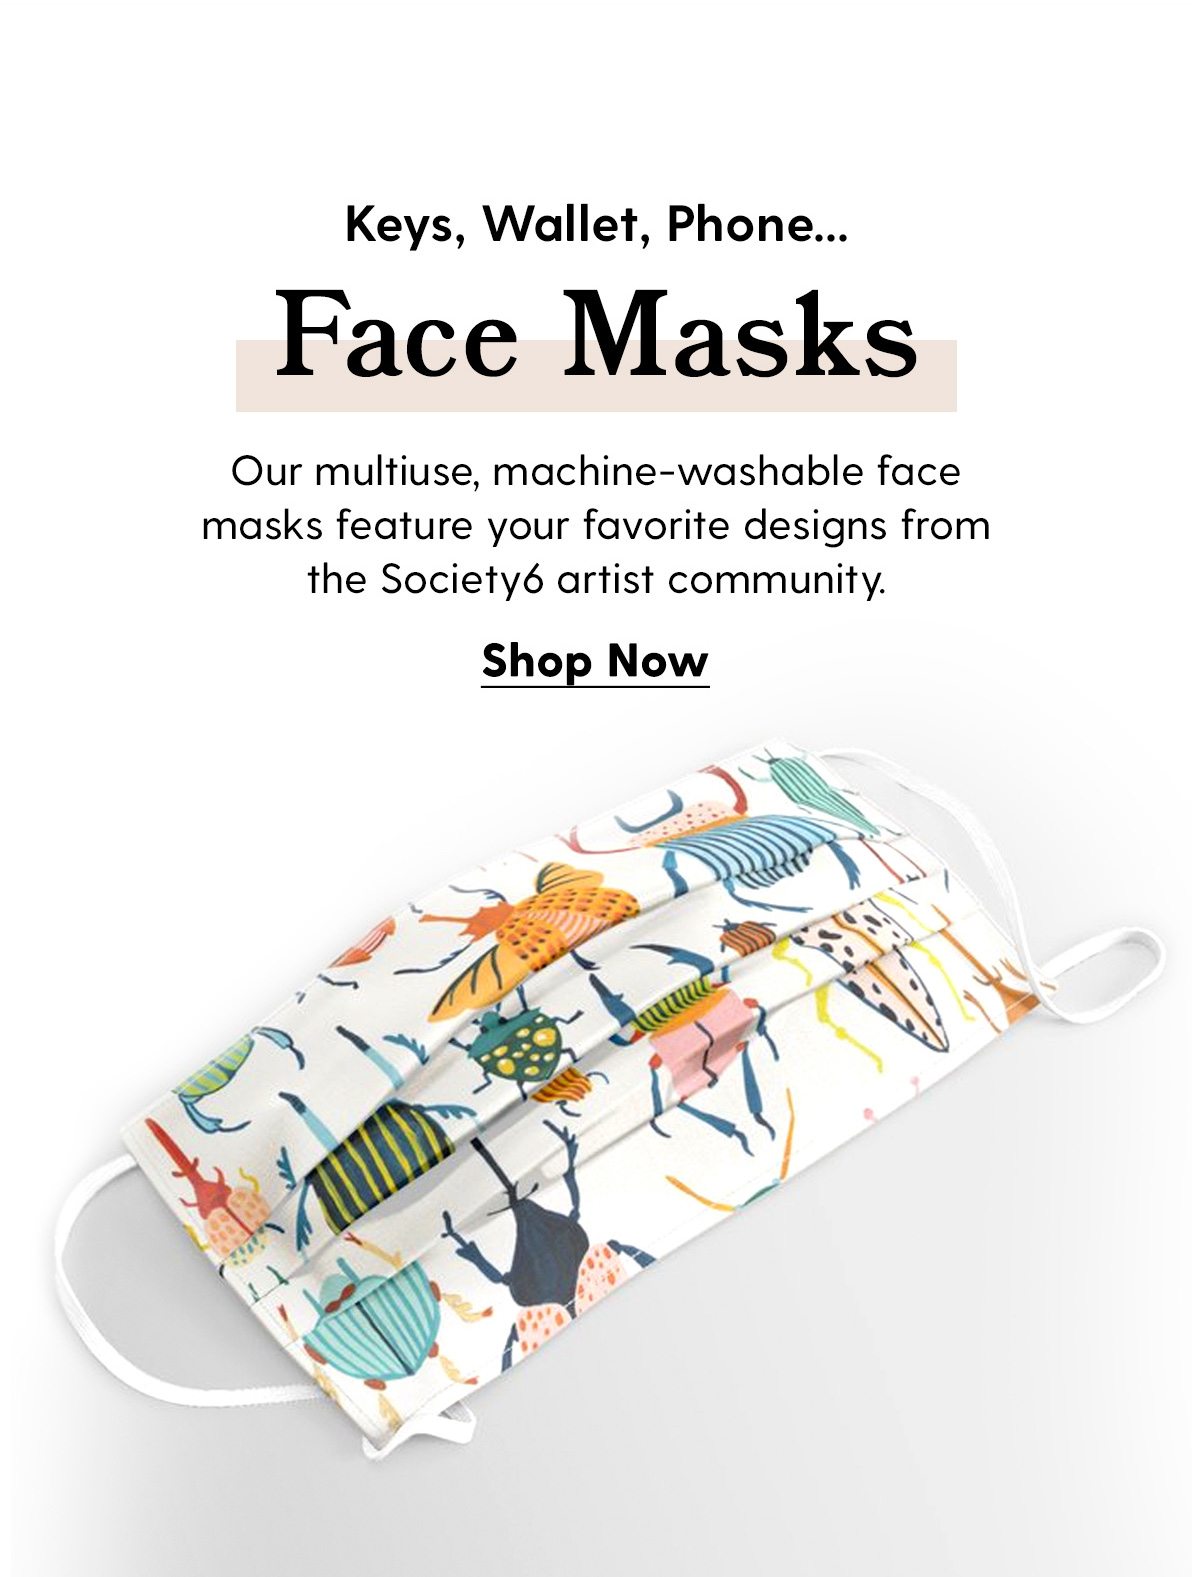 Face Masks Our multiuse, machine-washable face masks feature your favorite designs from the Society6 artist community. Shop Now